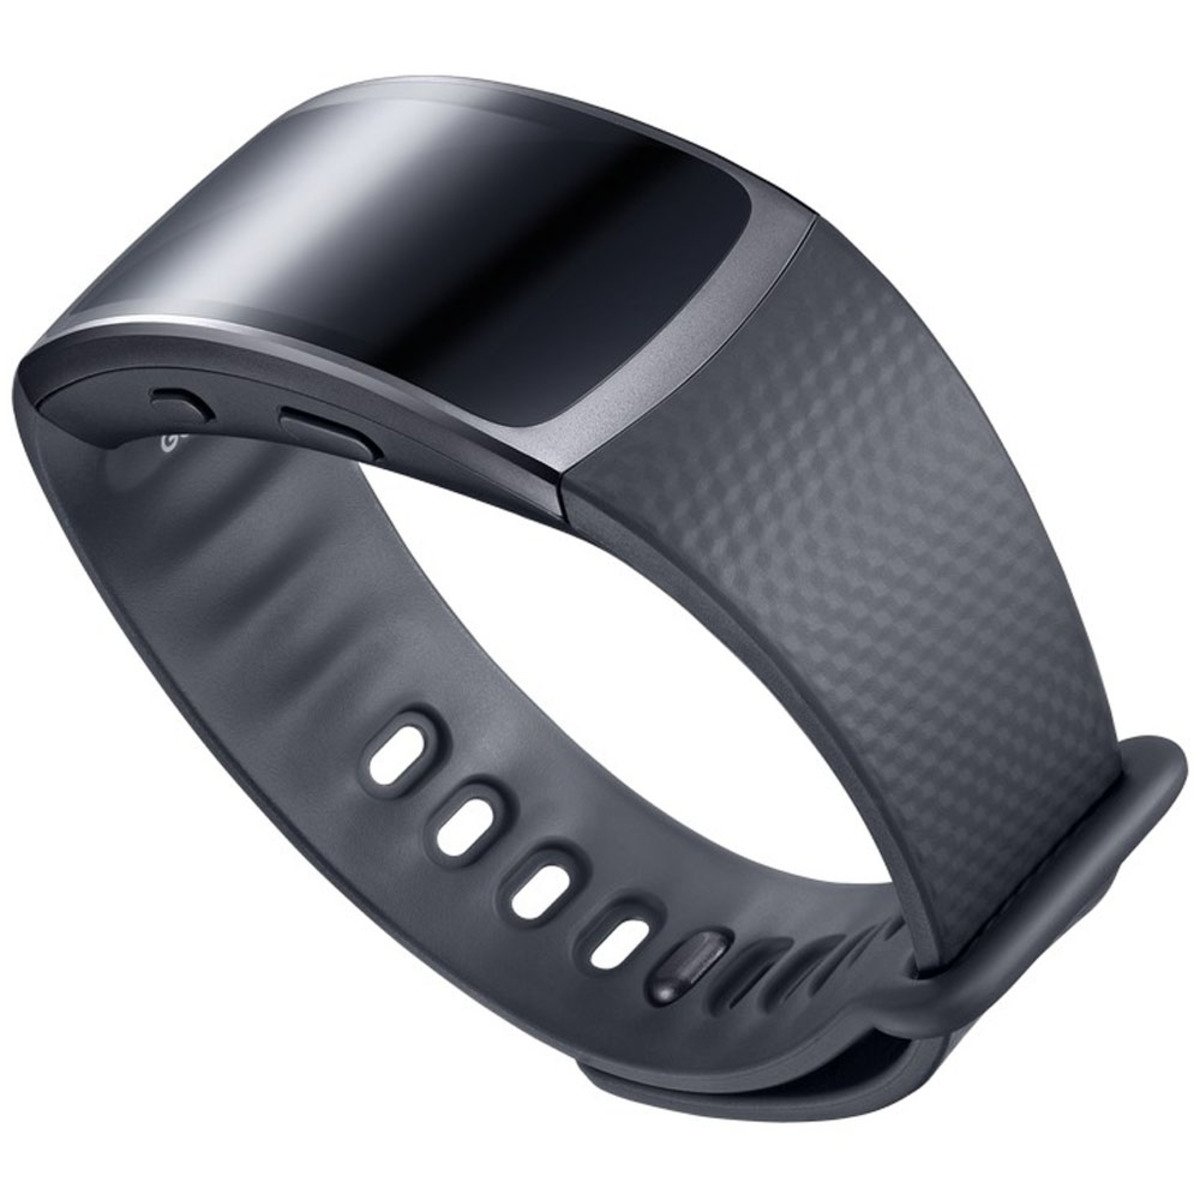 Samsung Gear Fit2 GPS Sports Band R3600 Large Black